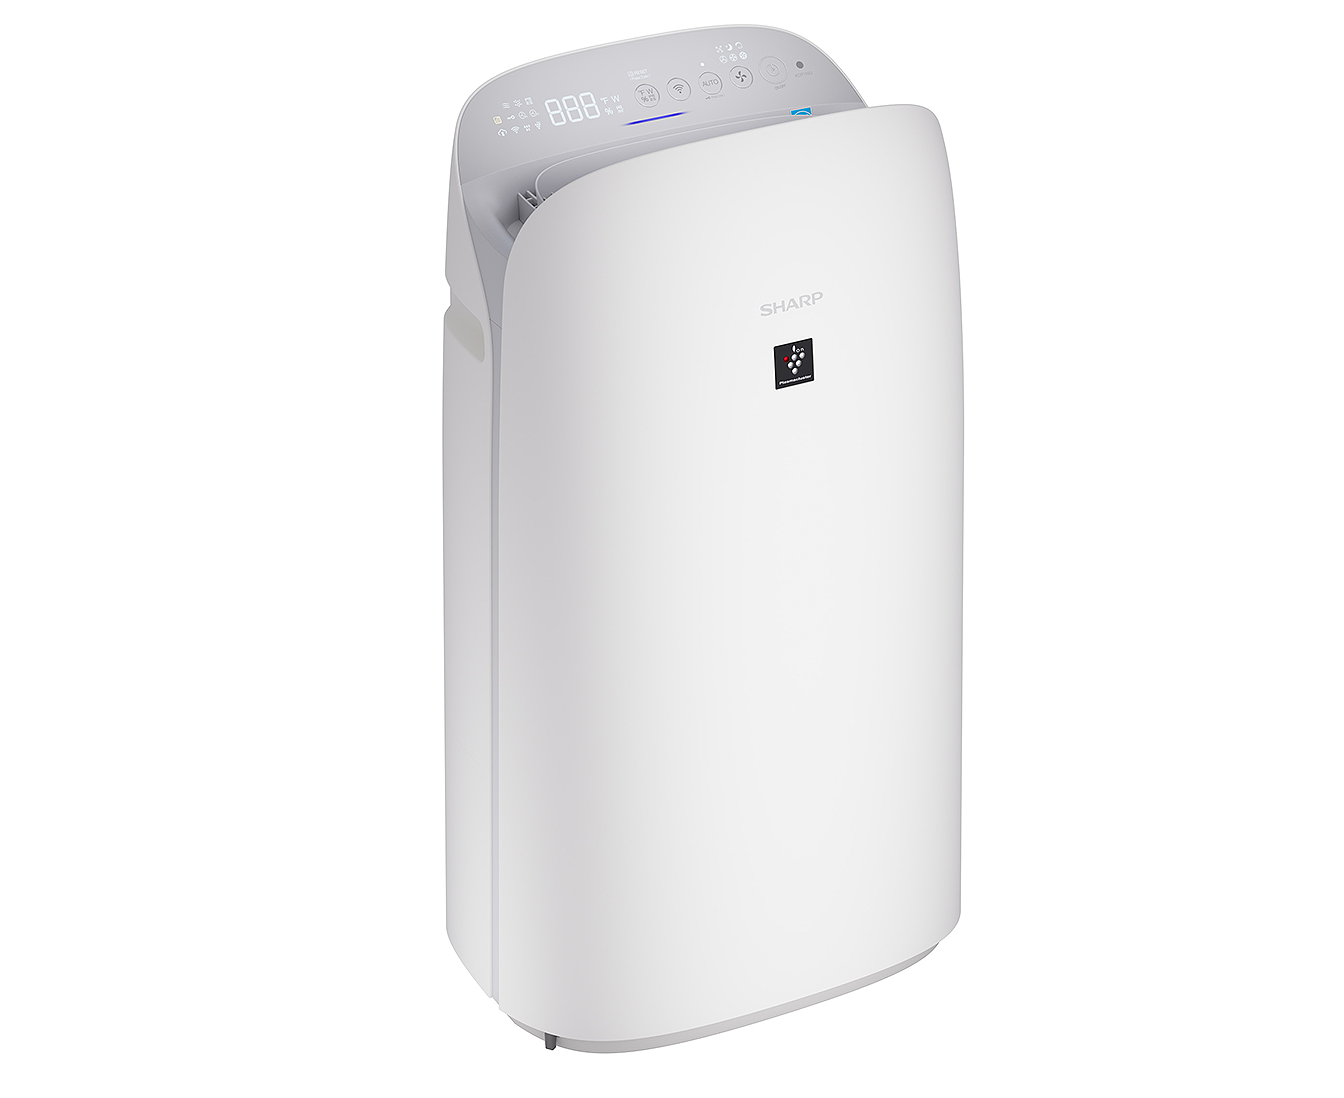 KCP110CW air purifier left side